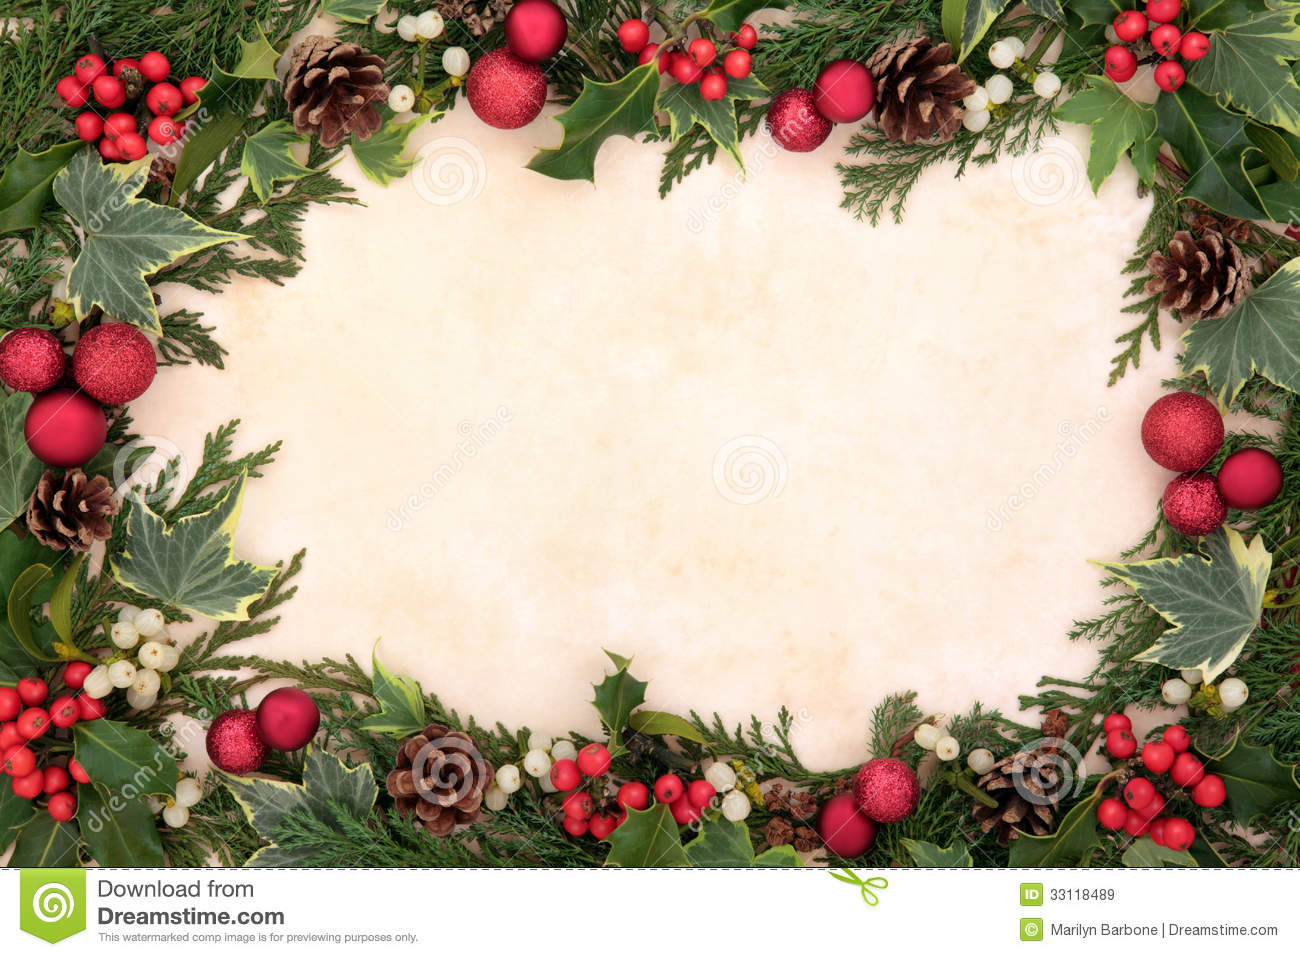 Traditional Christmas Border Royalty Free Stock Images   Image